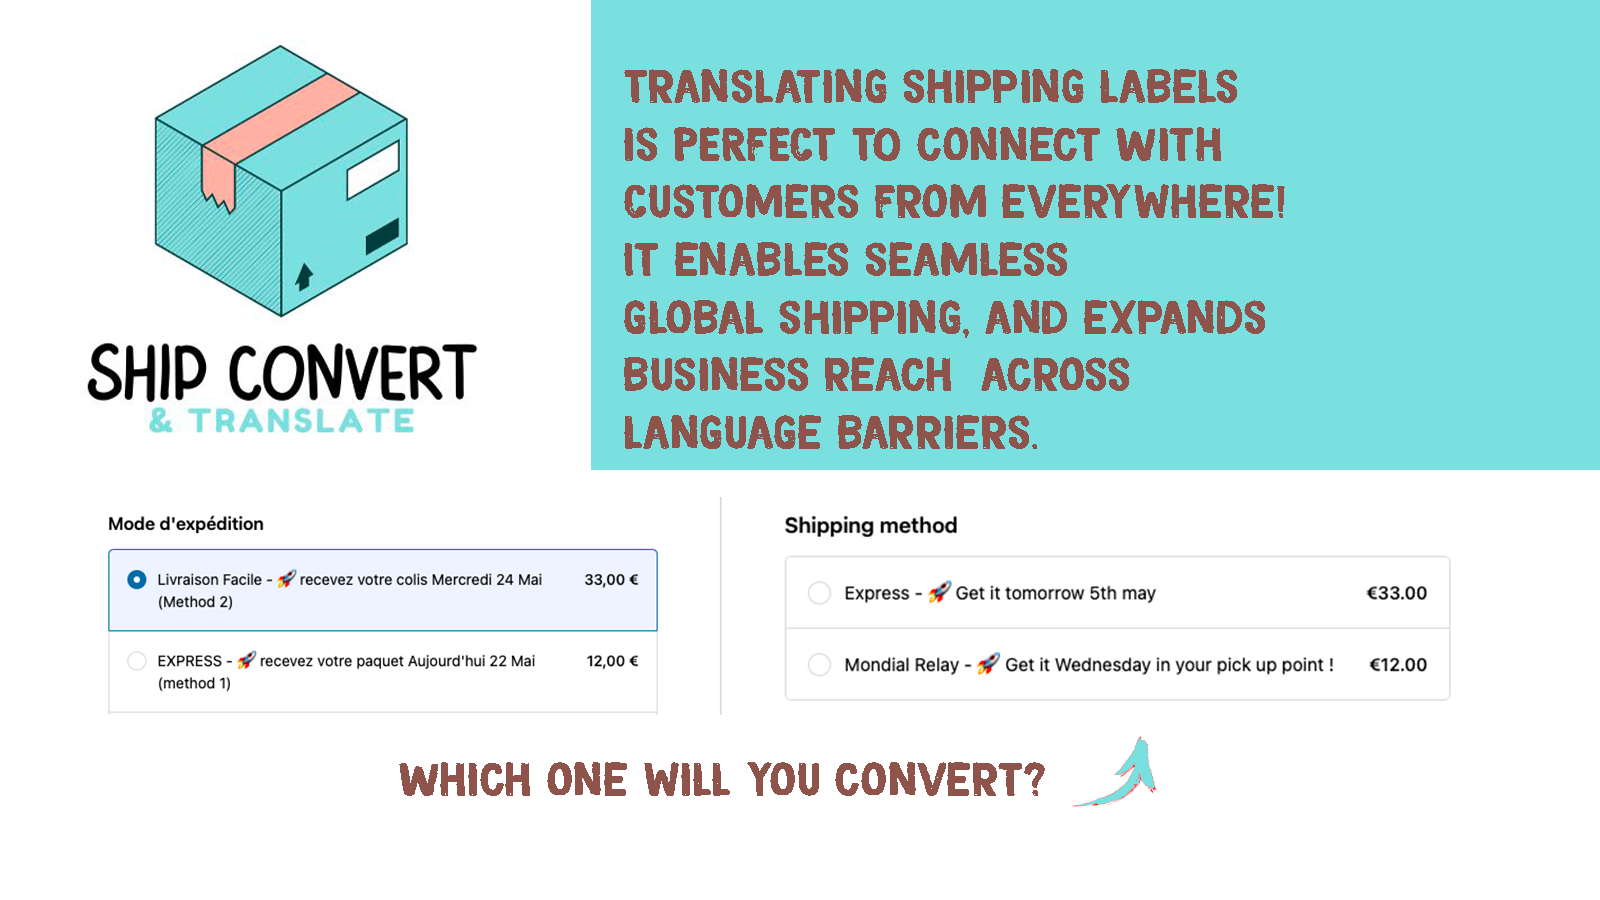 Translating shipping labels connects With  Customers